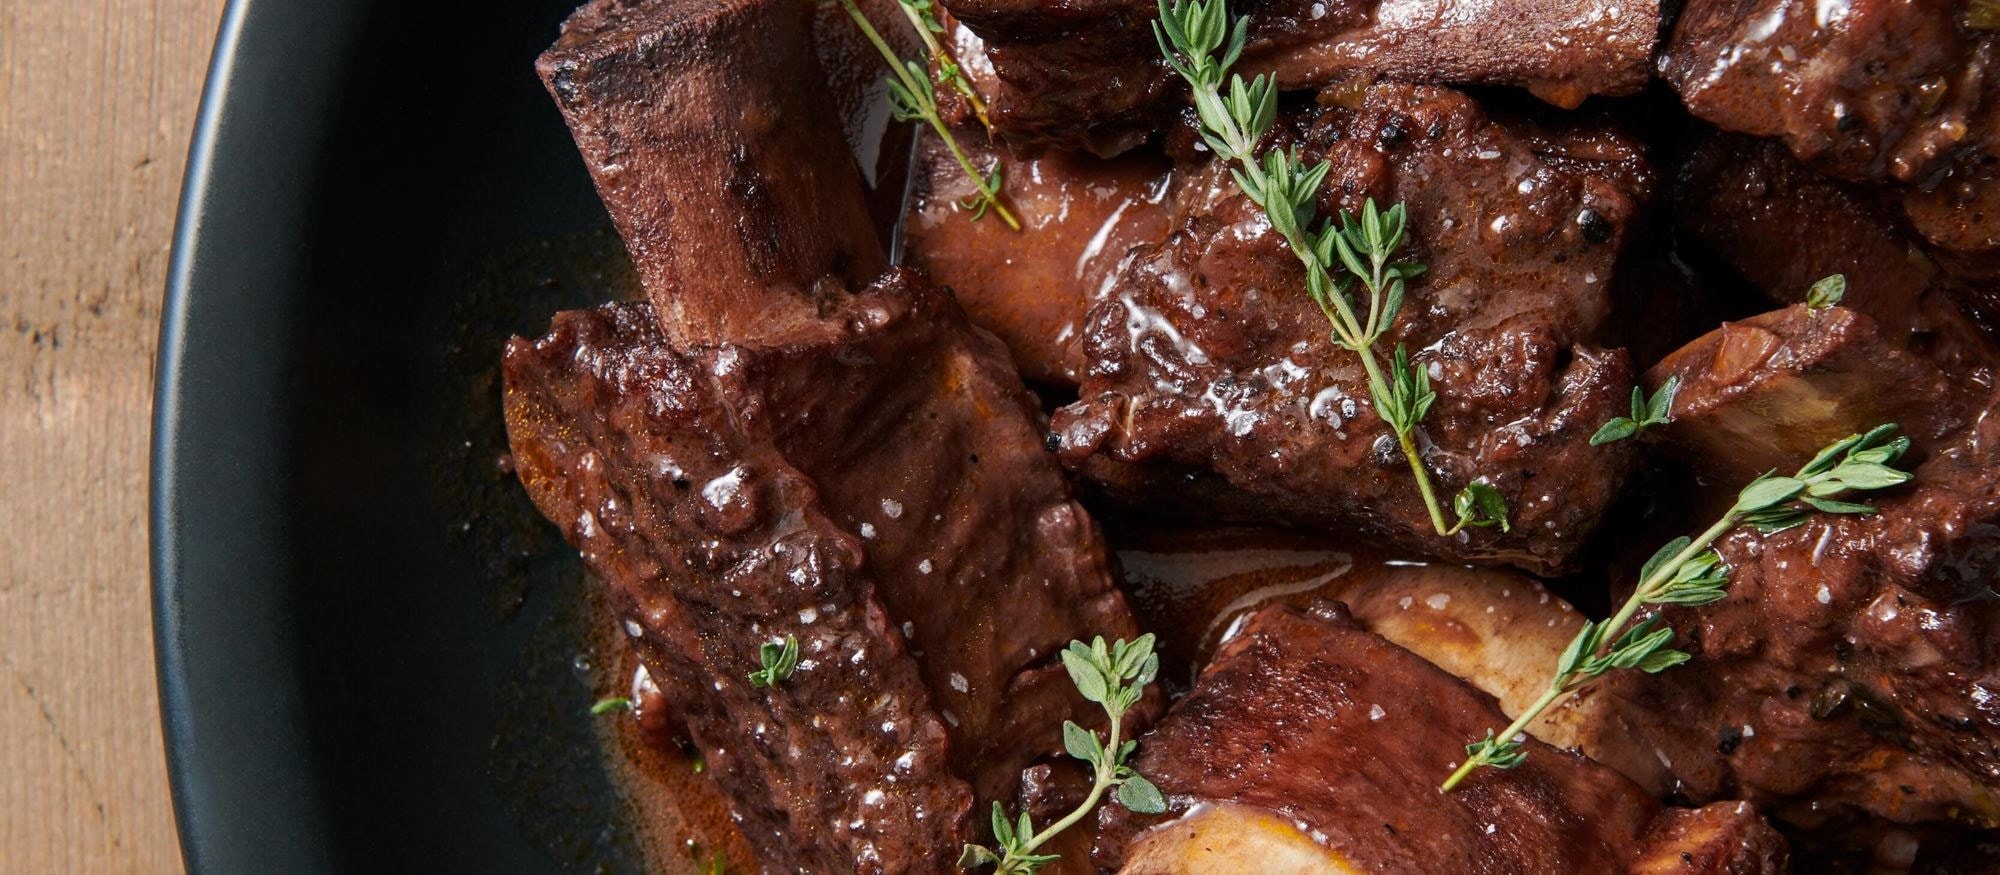 Easy and delicious Braised Short Ribs recipe using the Full Range Mode setting of your Wolf Oven